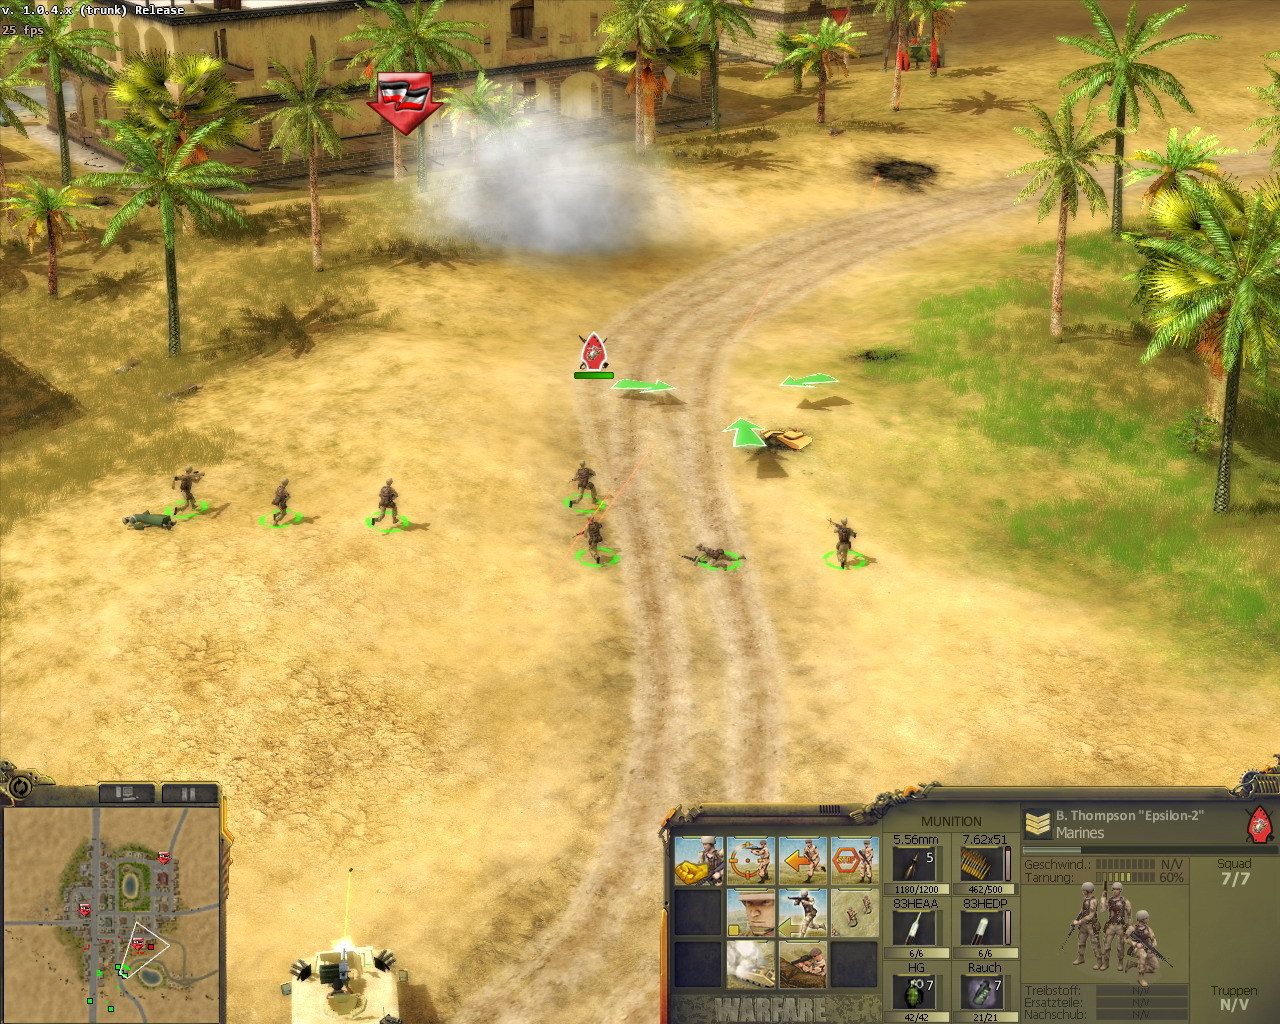 Download FREE Panzer Elite Action Fields Of Glory PC Game